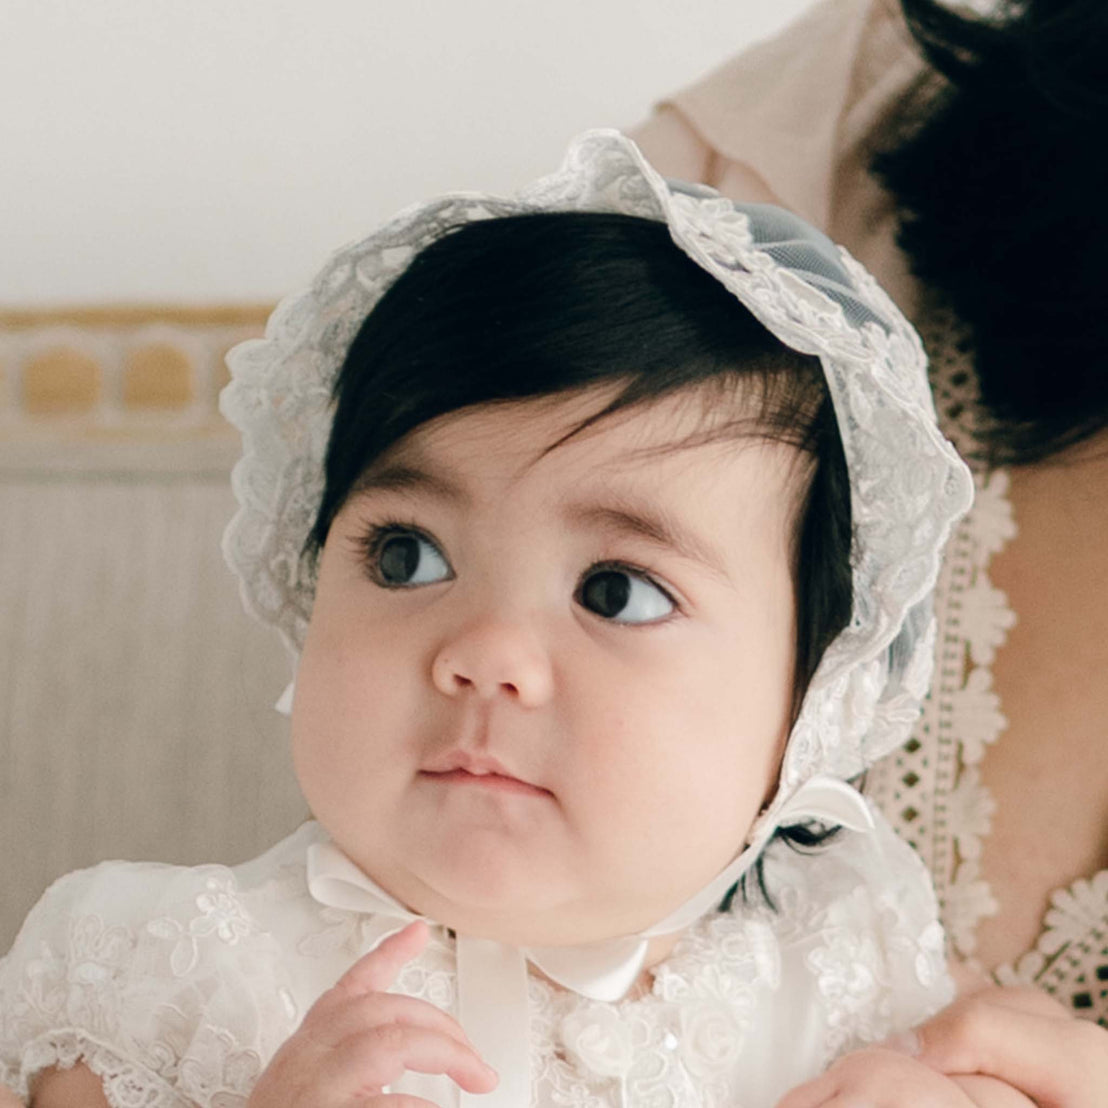 Baby girl with her mother by her side. She is wearing the Penelope Lace Bonnet, a bonnet featuring embroidered netting with a gorgeous floral pattern in ivory and champagne.